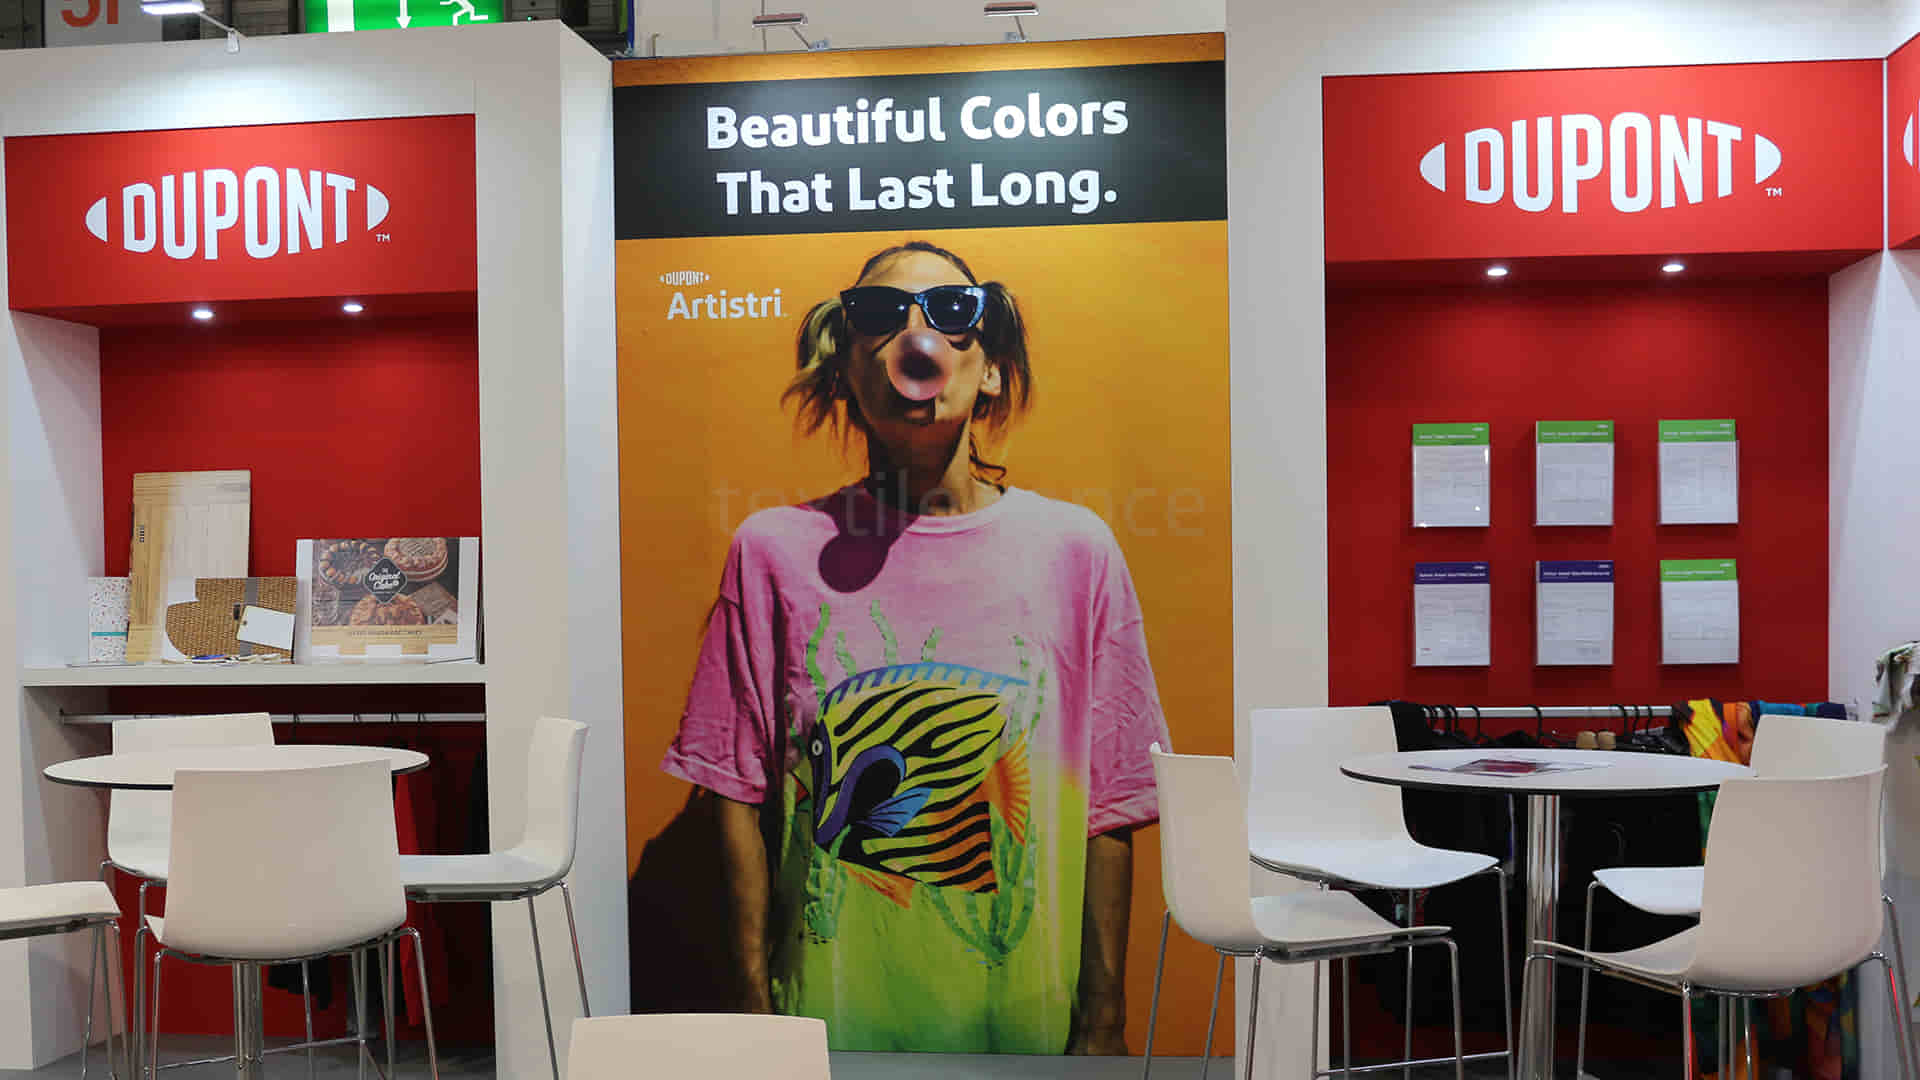 DuPont increases its strength in pigment printing Image Source: Textilegence